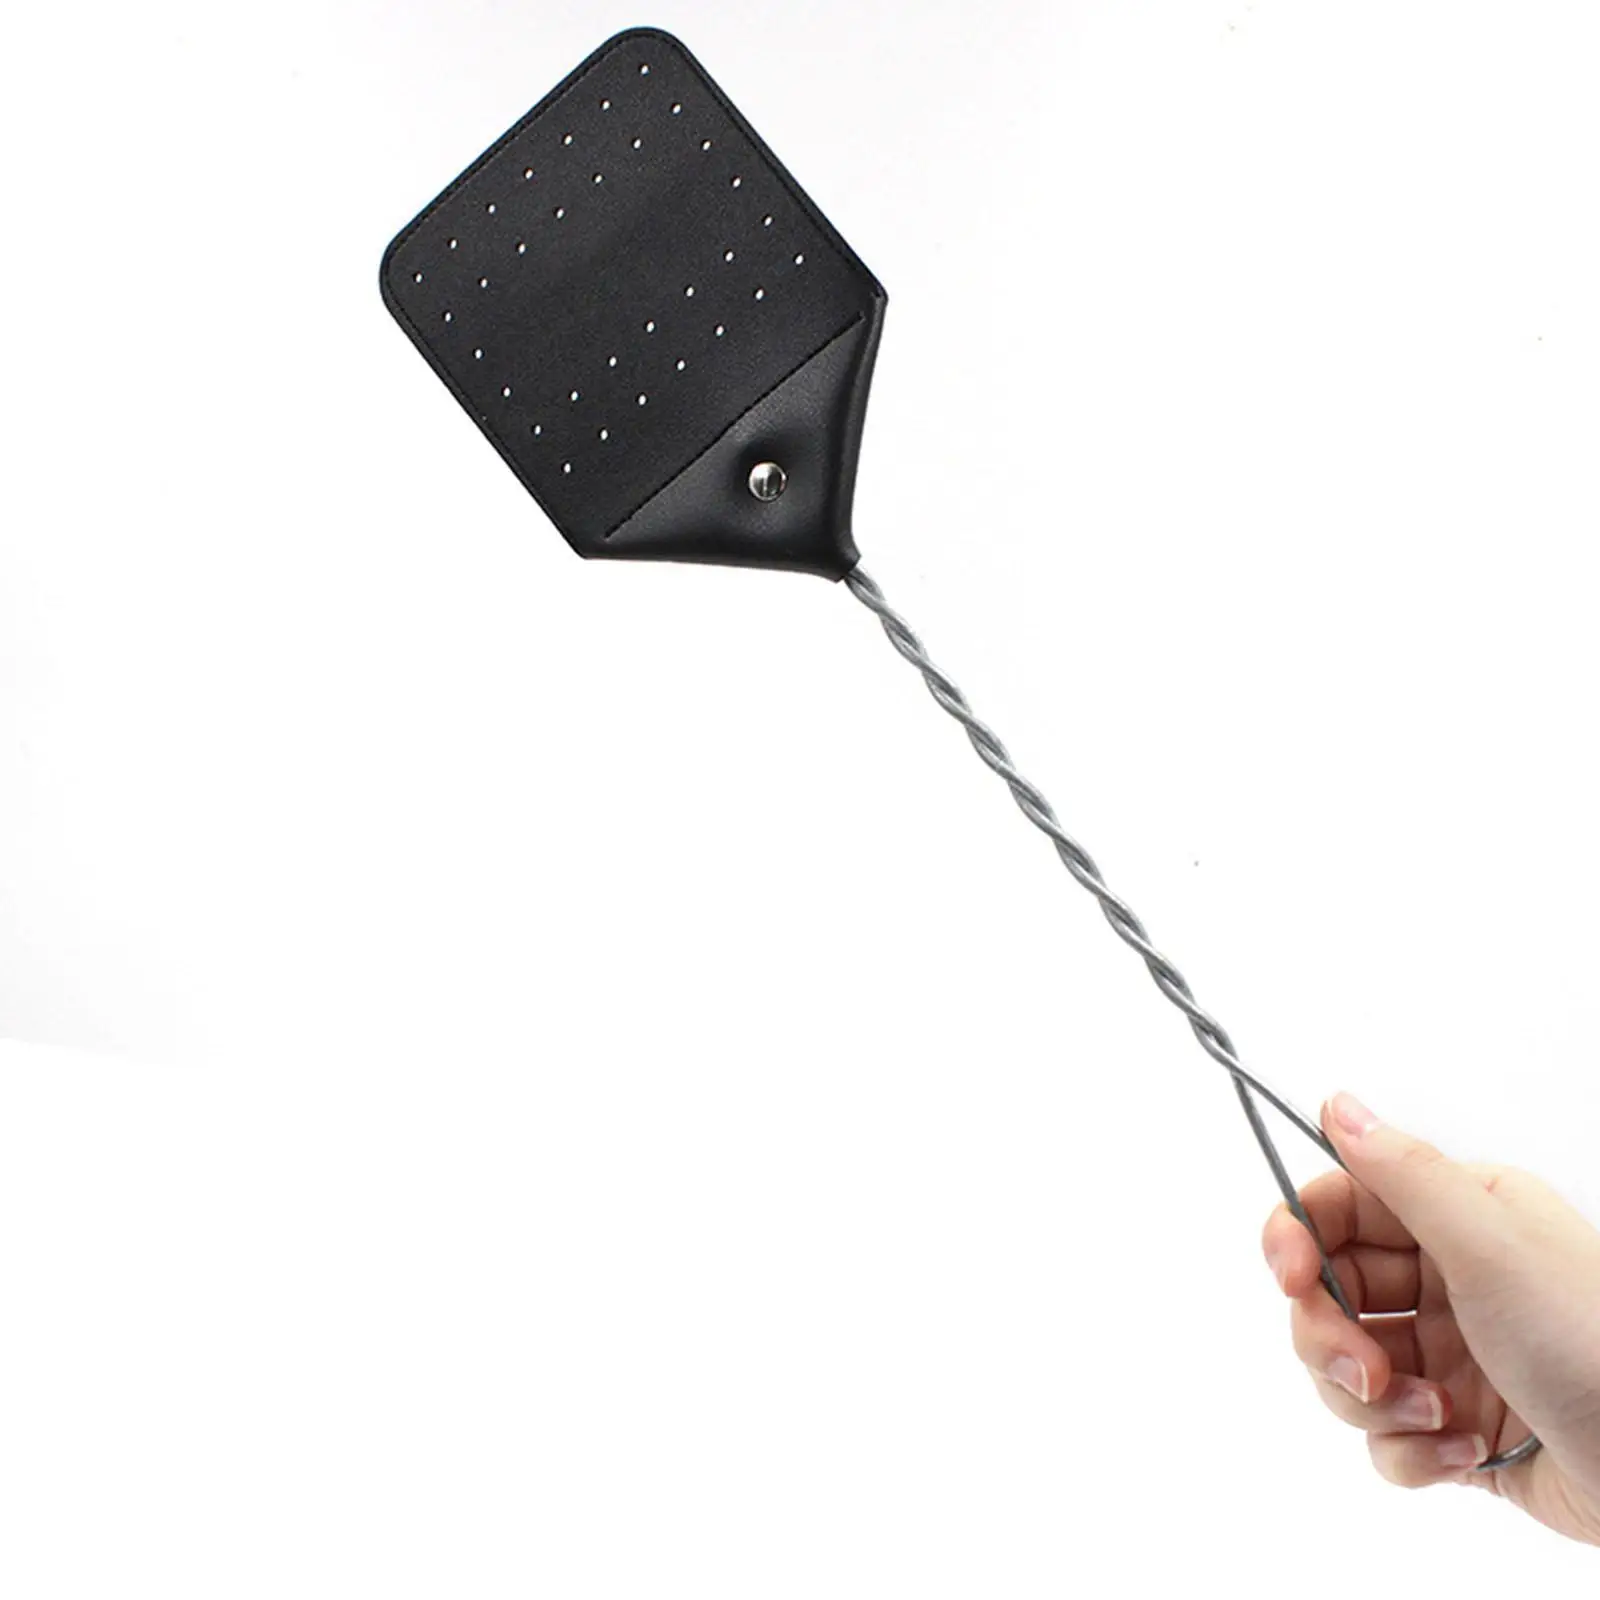 PU Leather Manual Fly Swatter Iron Long Handle for Outdoor Office Household